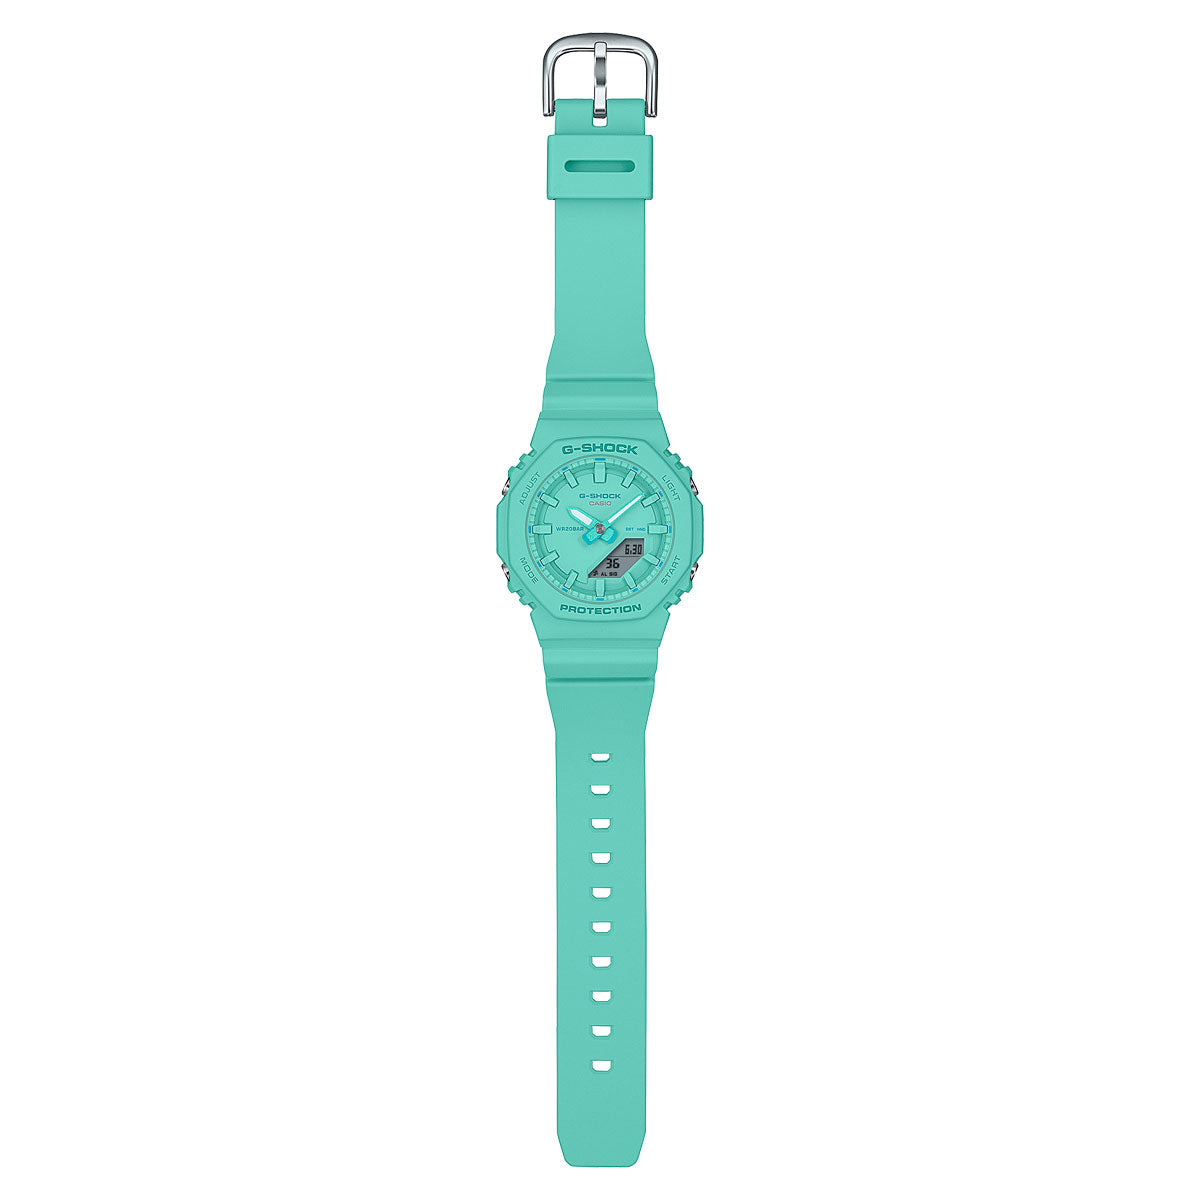 G-Shock GMAP2100-2A Watch - Teal image 2